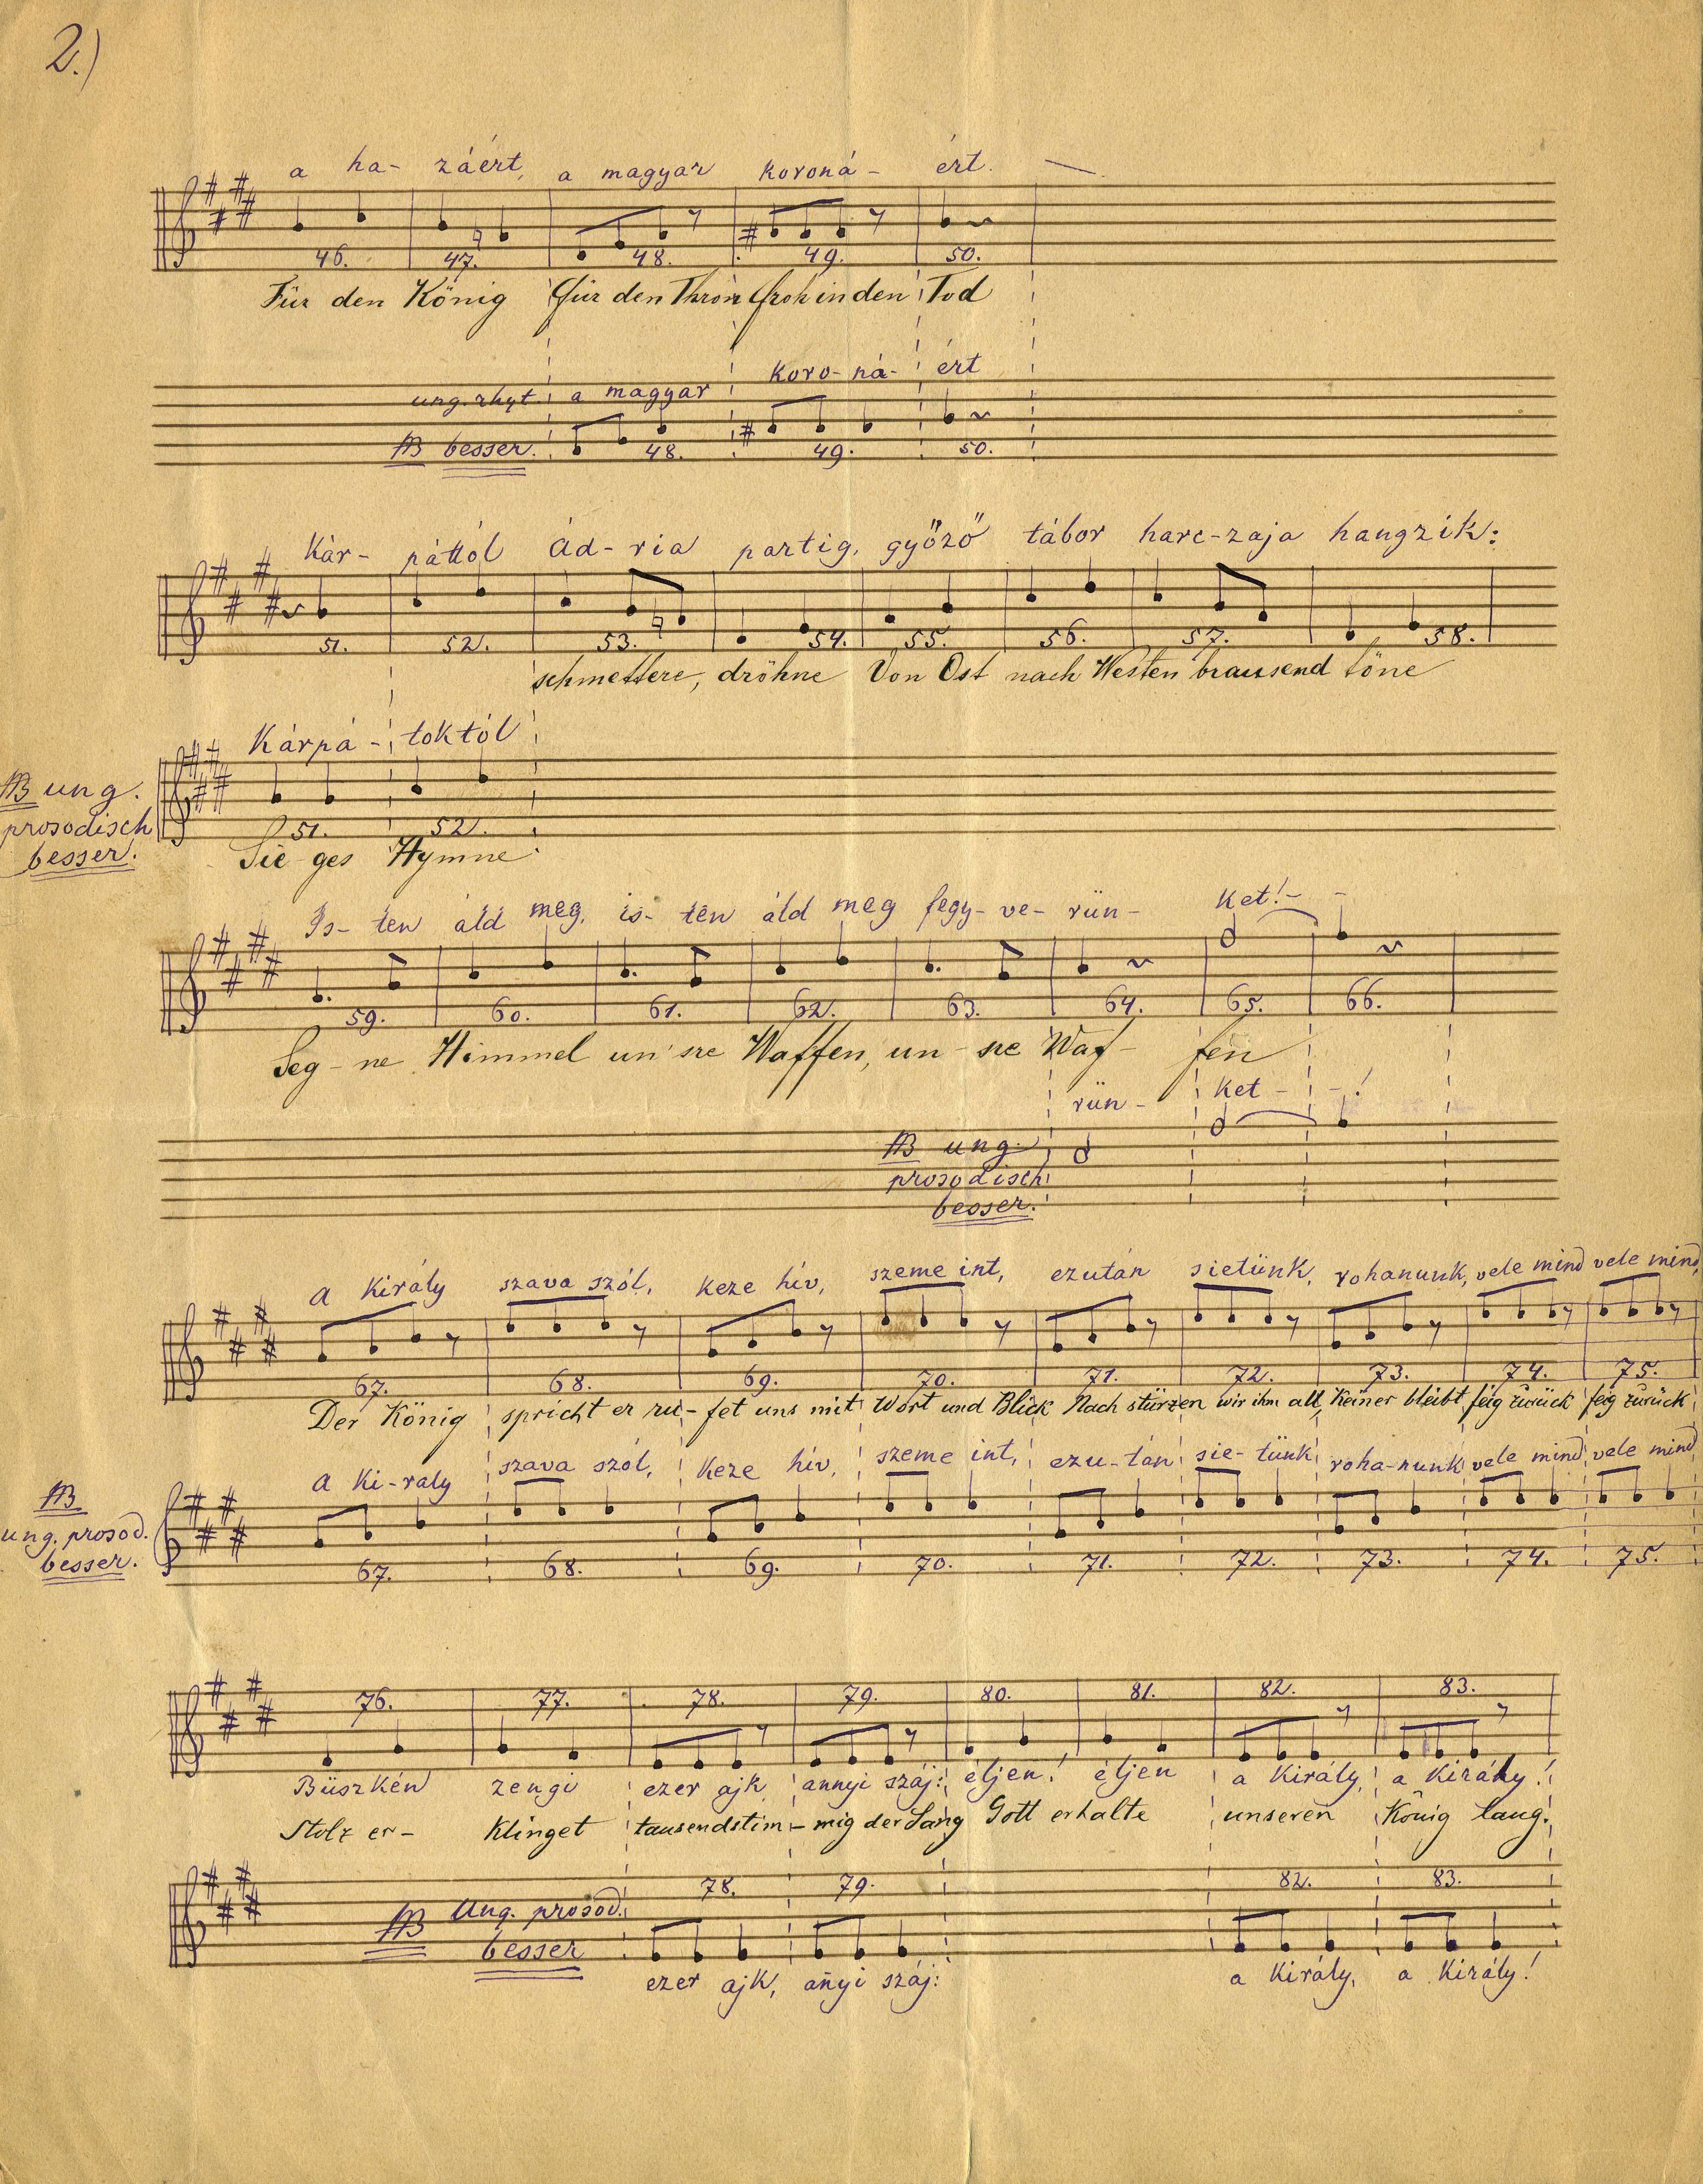 The lot consists in 18 fols of which : 4 complete pages in Liszt’s own hand, one of which front/rear (as shown is this page), 10 printed pages, with many bars of music having been inserted by the composer (the following page), 4-page musical